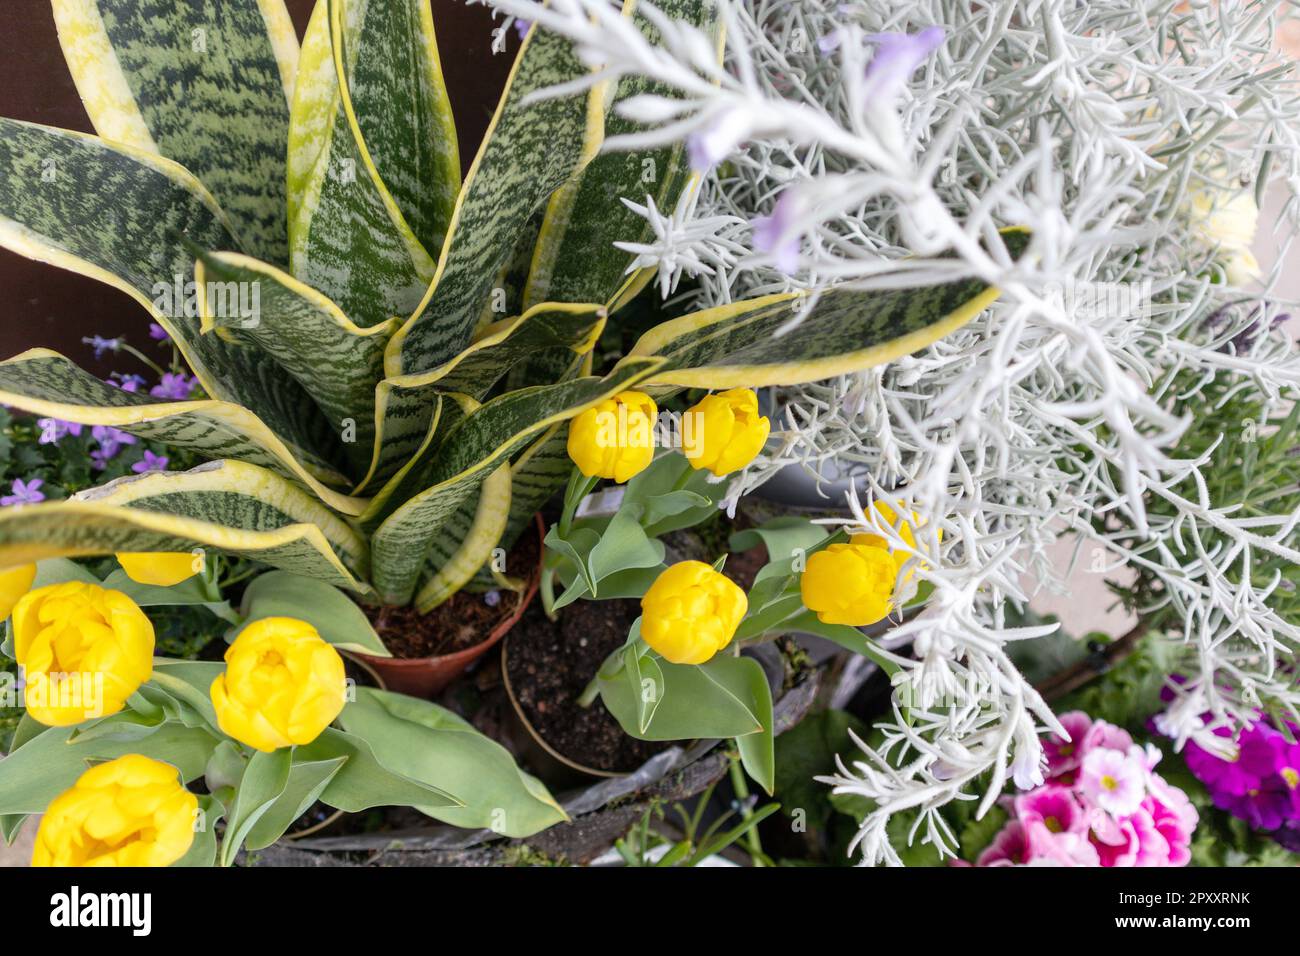 A planter with a plant in it and a white plant in the background. Stock Photo